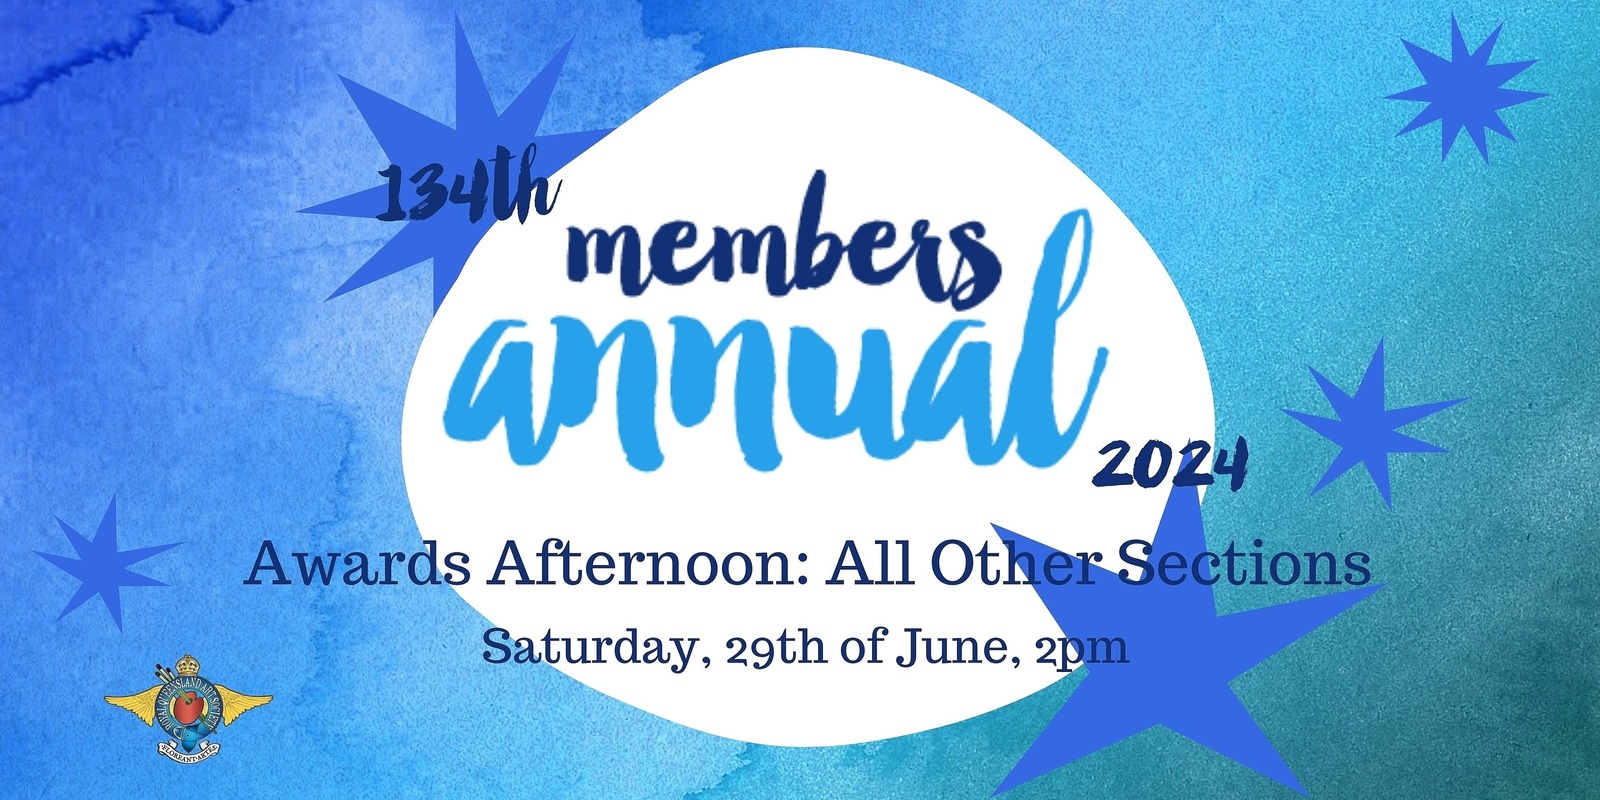 Banner image for Members Annual Awards Afternoon: All Other Sections